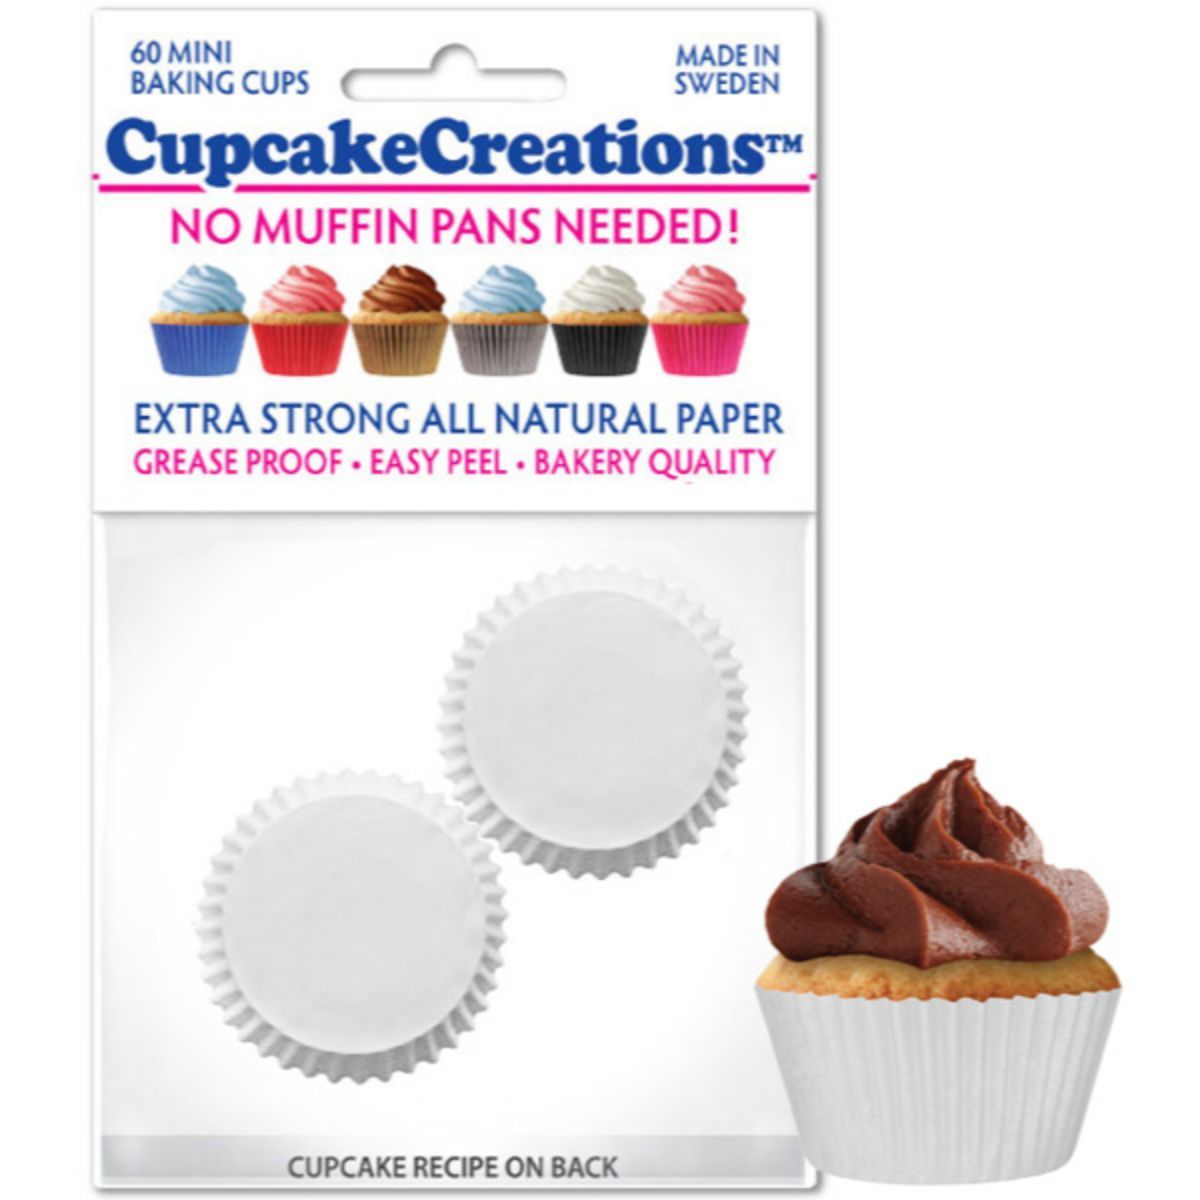 Cupcake Creations Off White No Muffin Pan Required 24 Jumbo Baking Cups New!